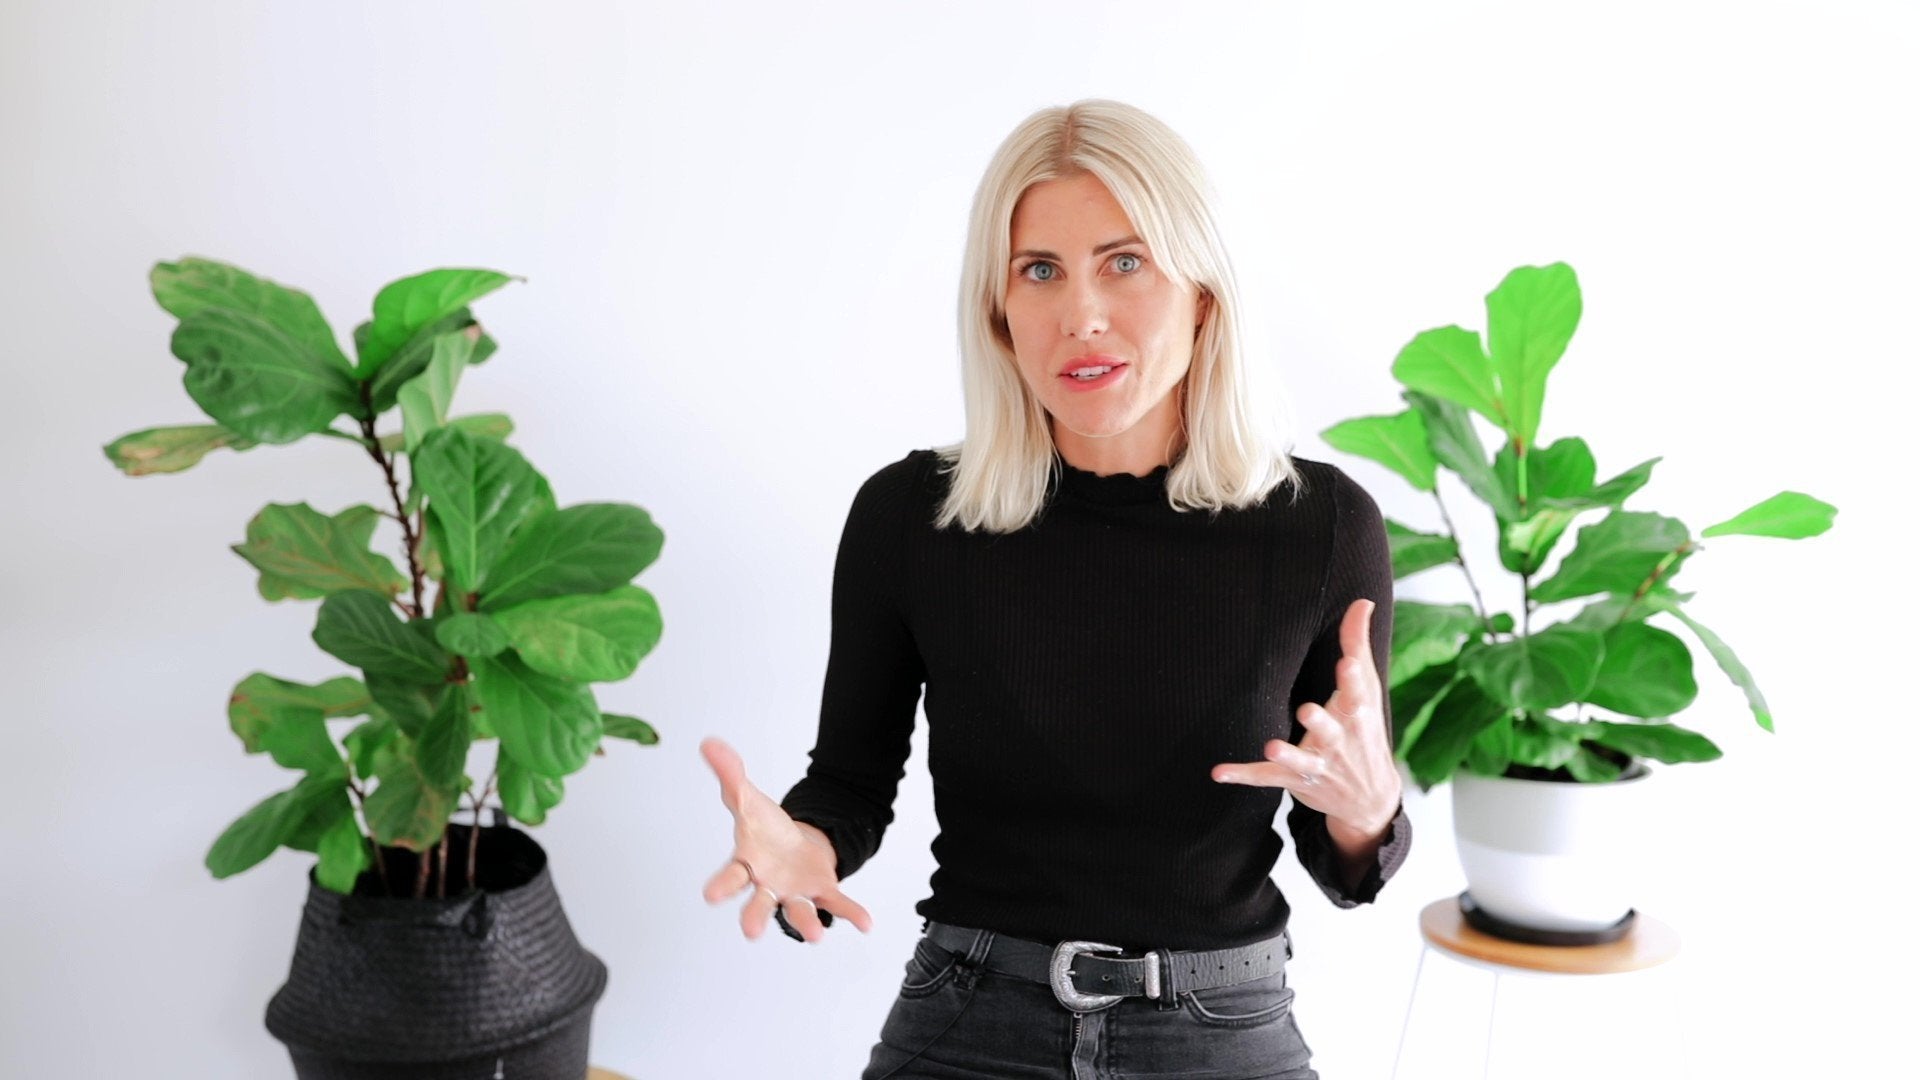 Watch: Detoxifying - Why It All Begins In Your Gut